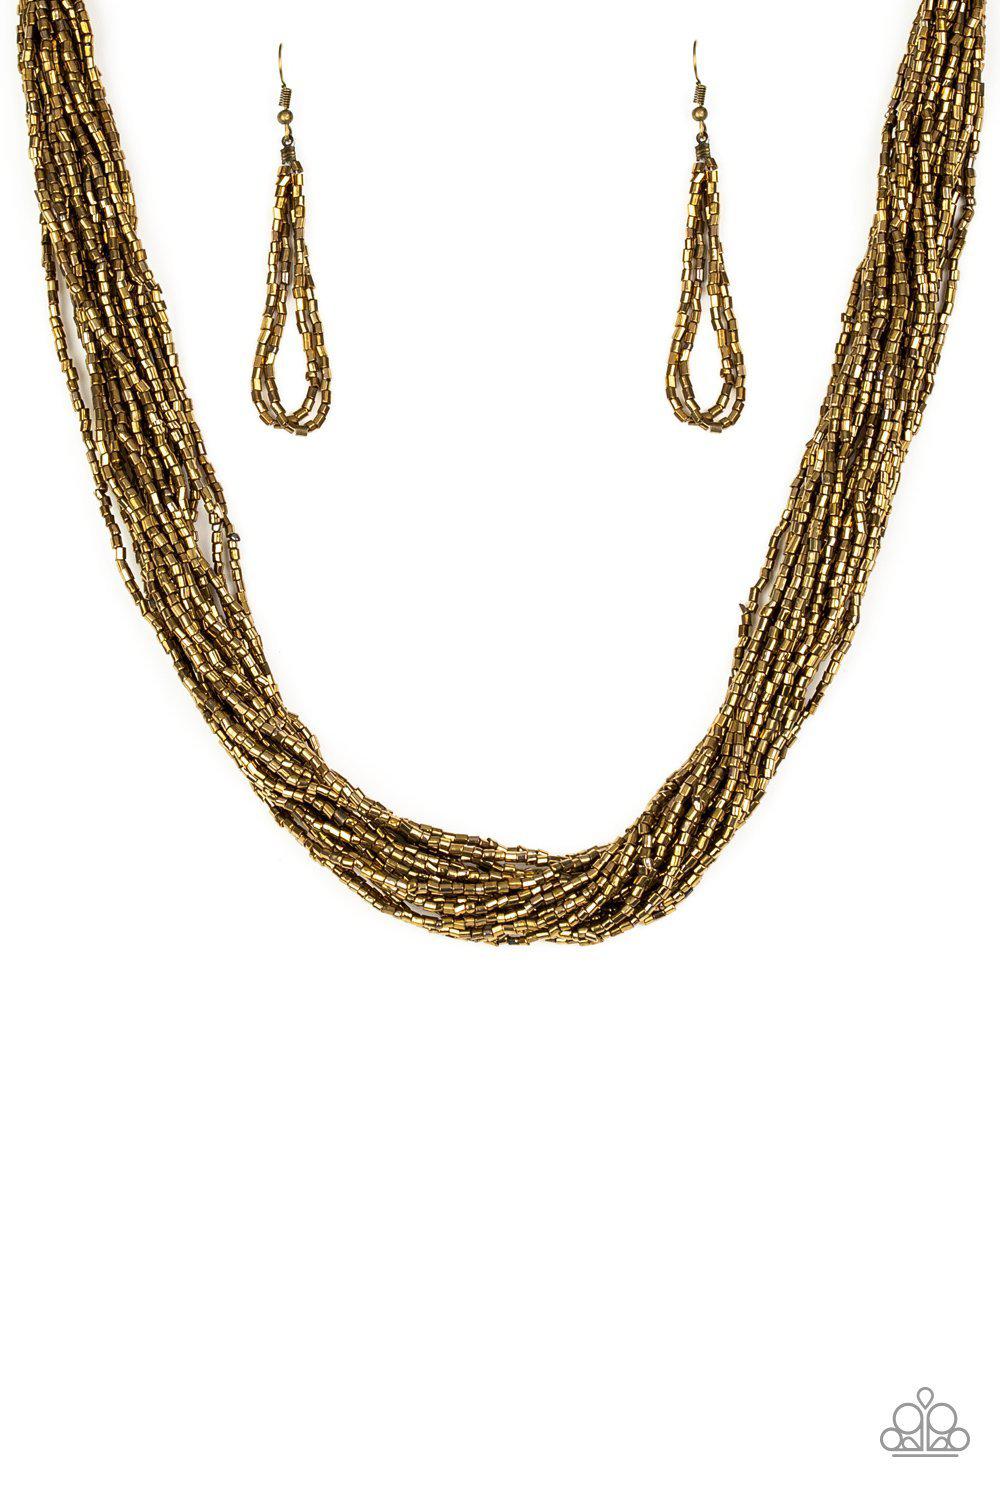 The Speed Of STARLIGHT Brass Seed Bead Necklace - Paparazzi Accessories - lightbox -CarasShop.com - $5 Jewelry by Cara Jewels